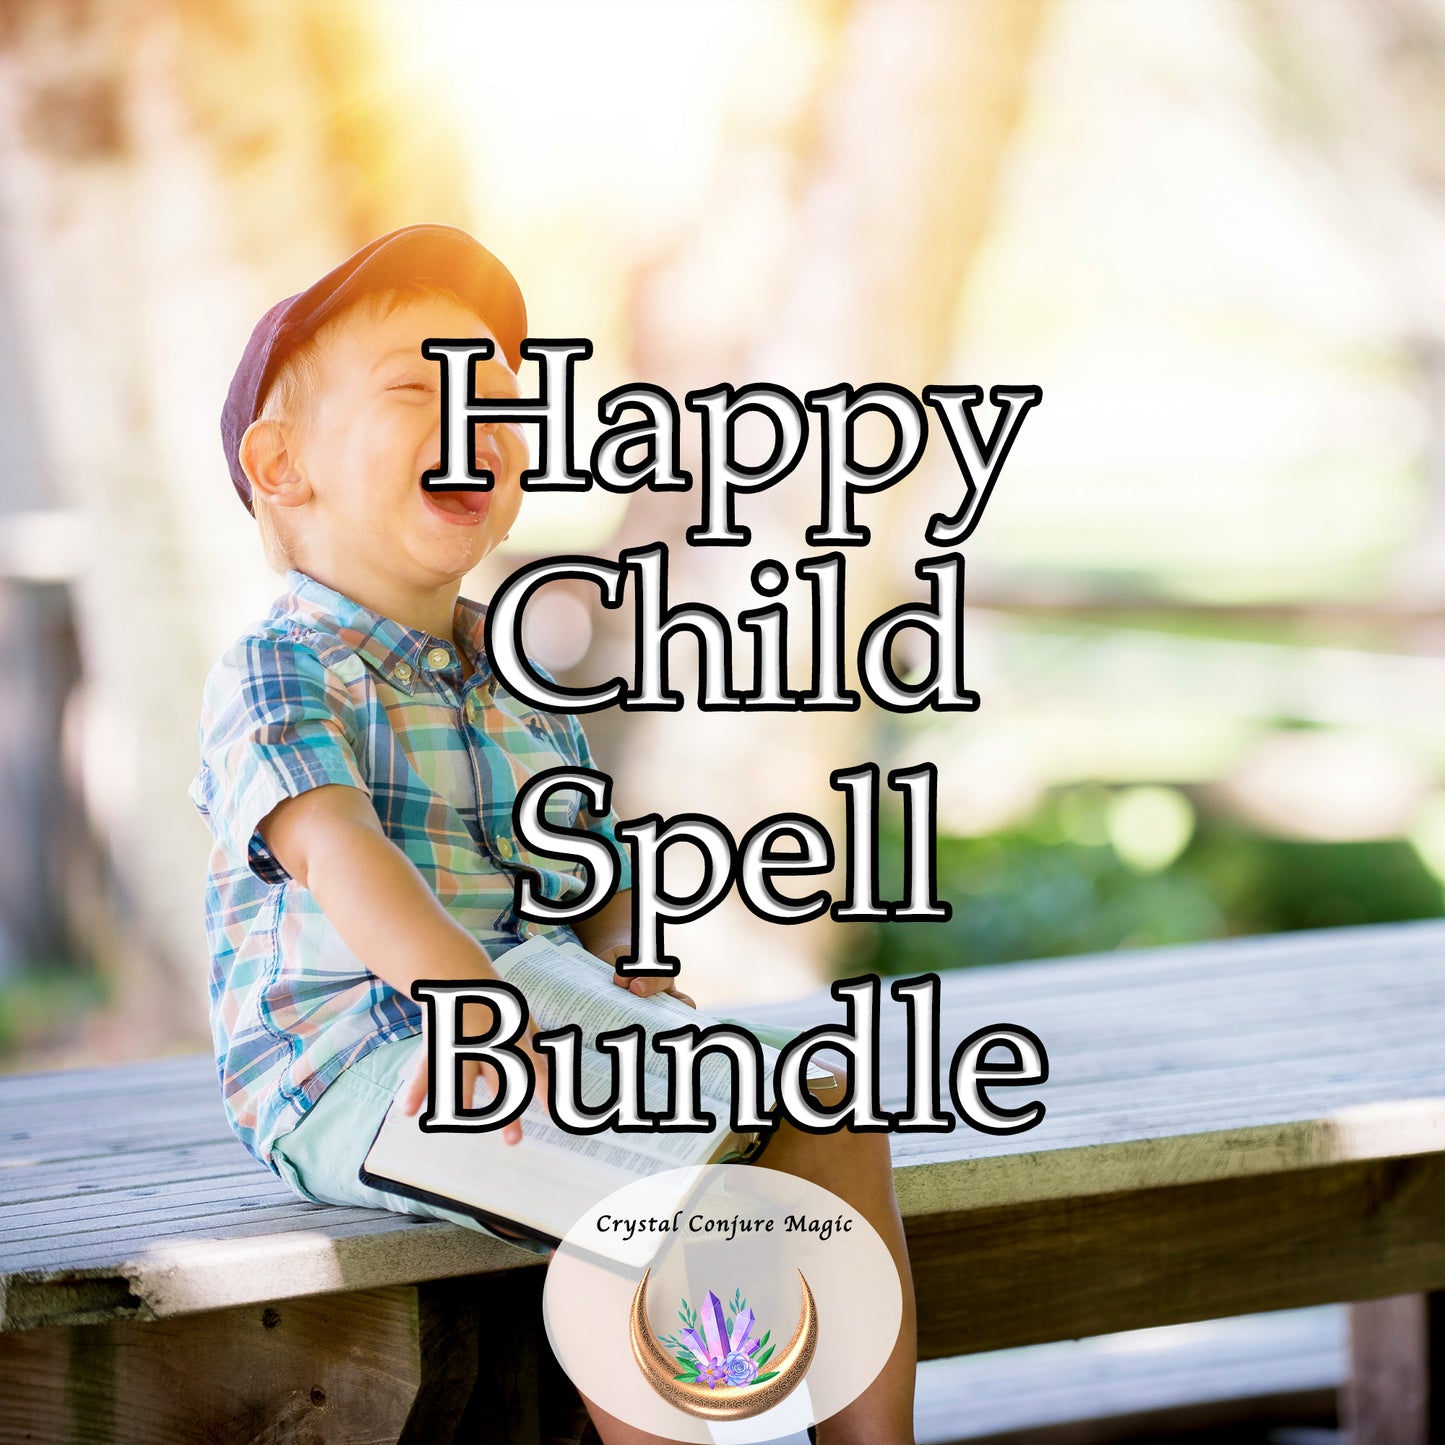 Happy Child Spell Bundle - dispel any worry, filling their world with laughter, smiles, and wonder